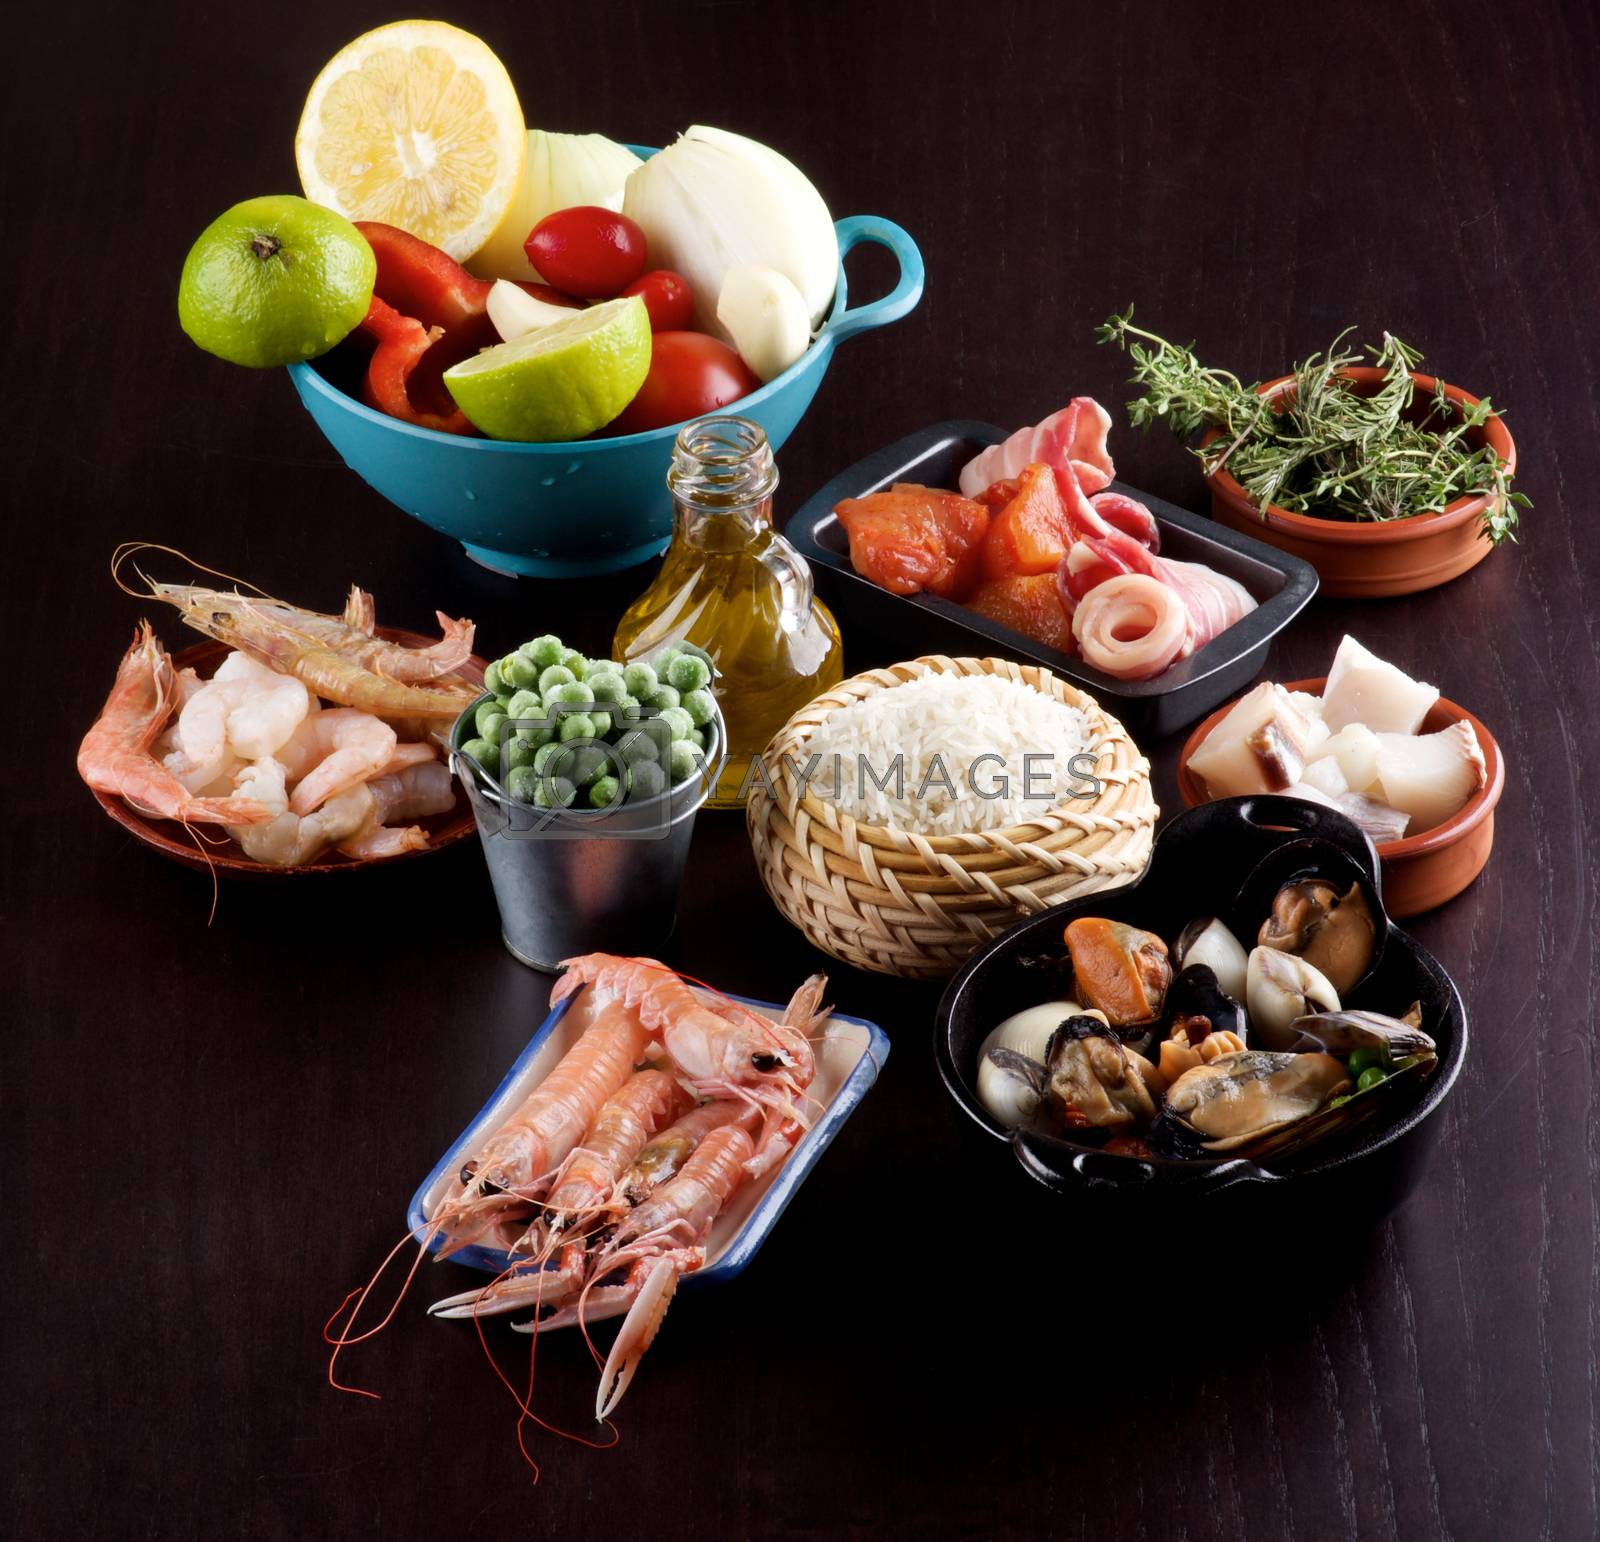 Royalty free image of Raw Ingredients for Paella by zhekos